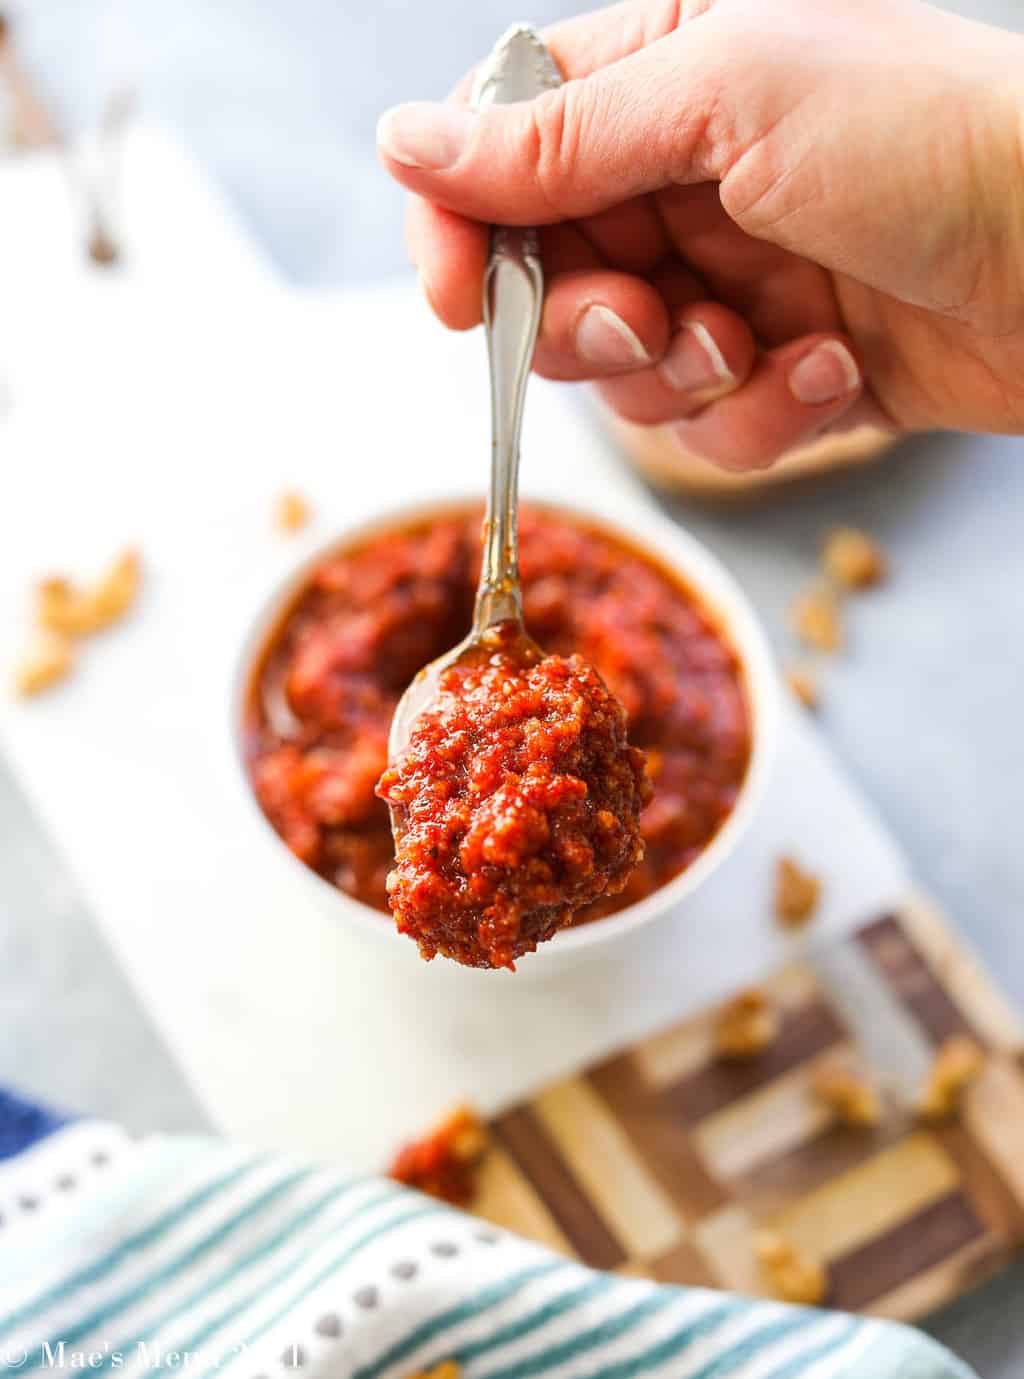 An up-close shot of a scoop of red pesto in front of the dish of pesto